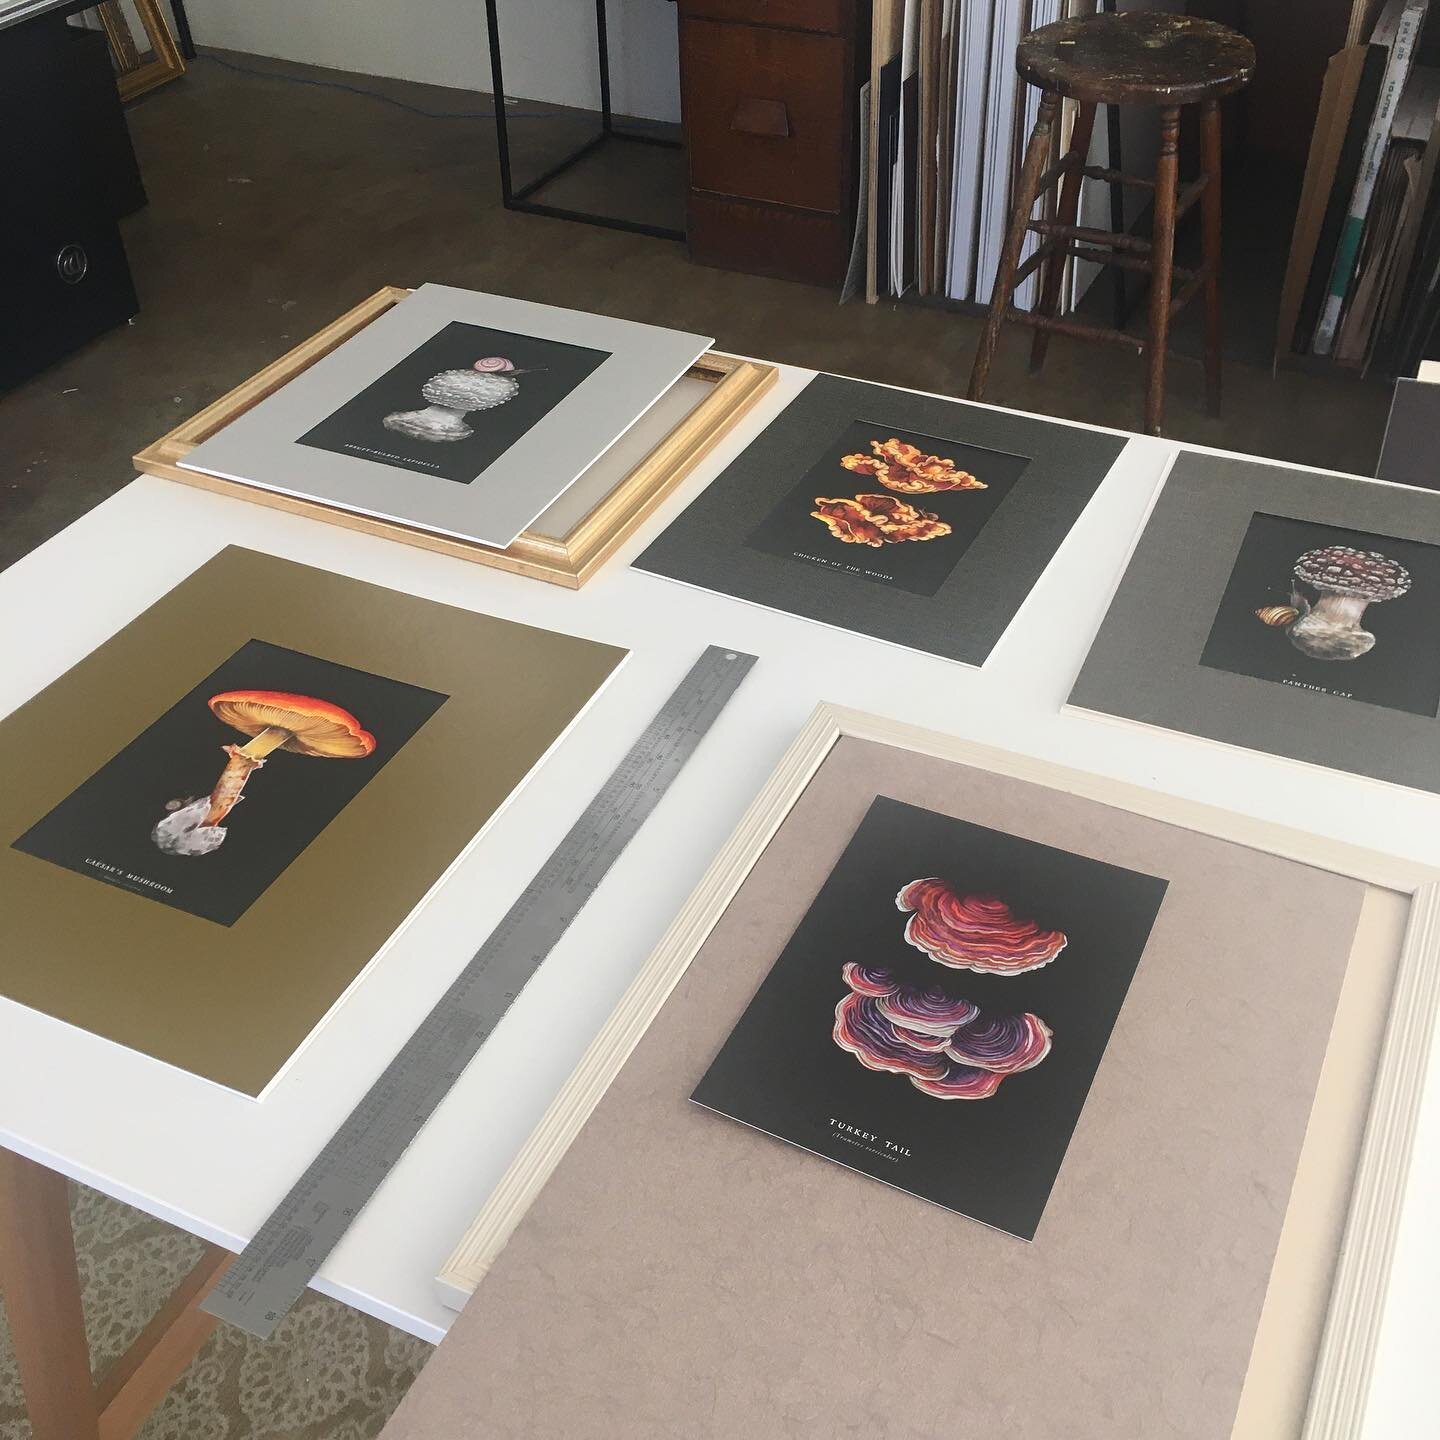 Putting together this sweet collection of mushroom illustrations today 🍄☺️
Special thanks to @maeganmayhem for the content ✨
#customframing #frameshop #artistrun #smallbiz #illustrations